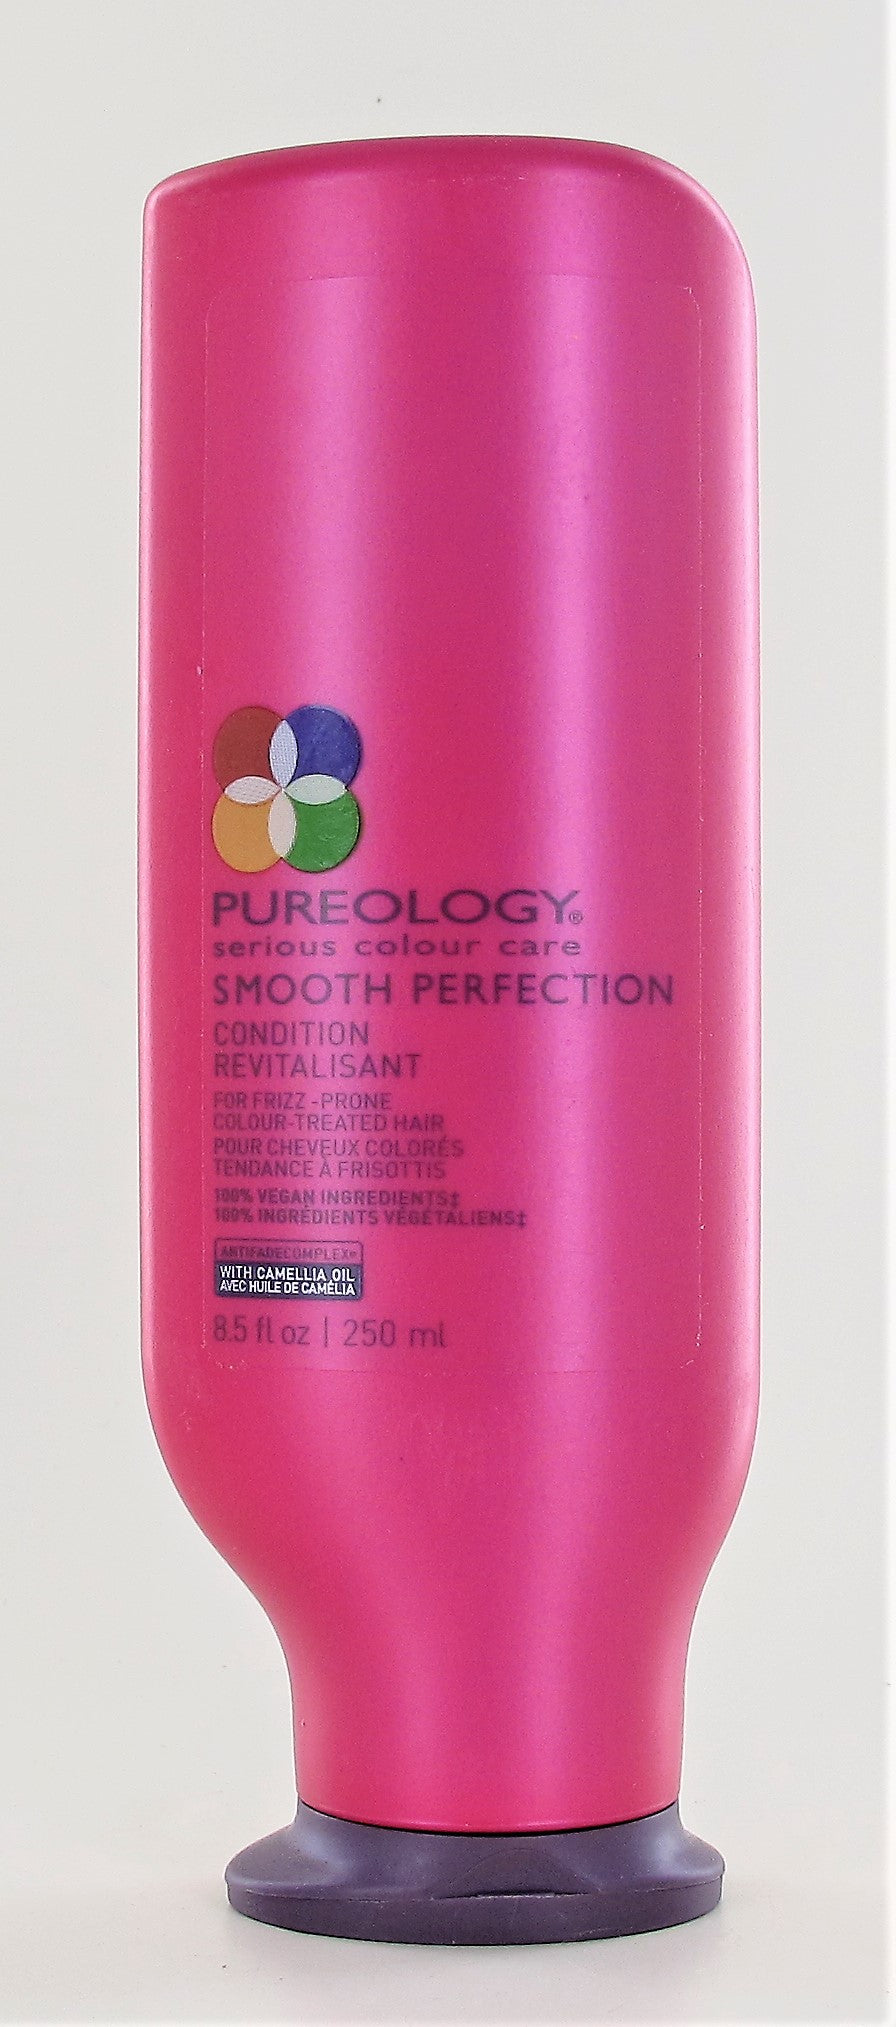 Pureology Smooth Perfection Conditioner 8.5 Oz